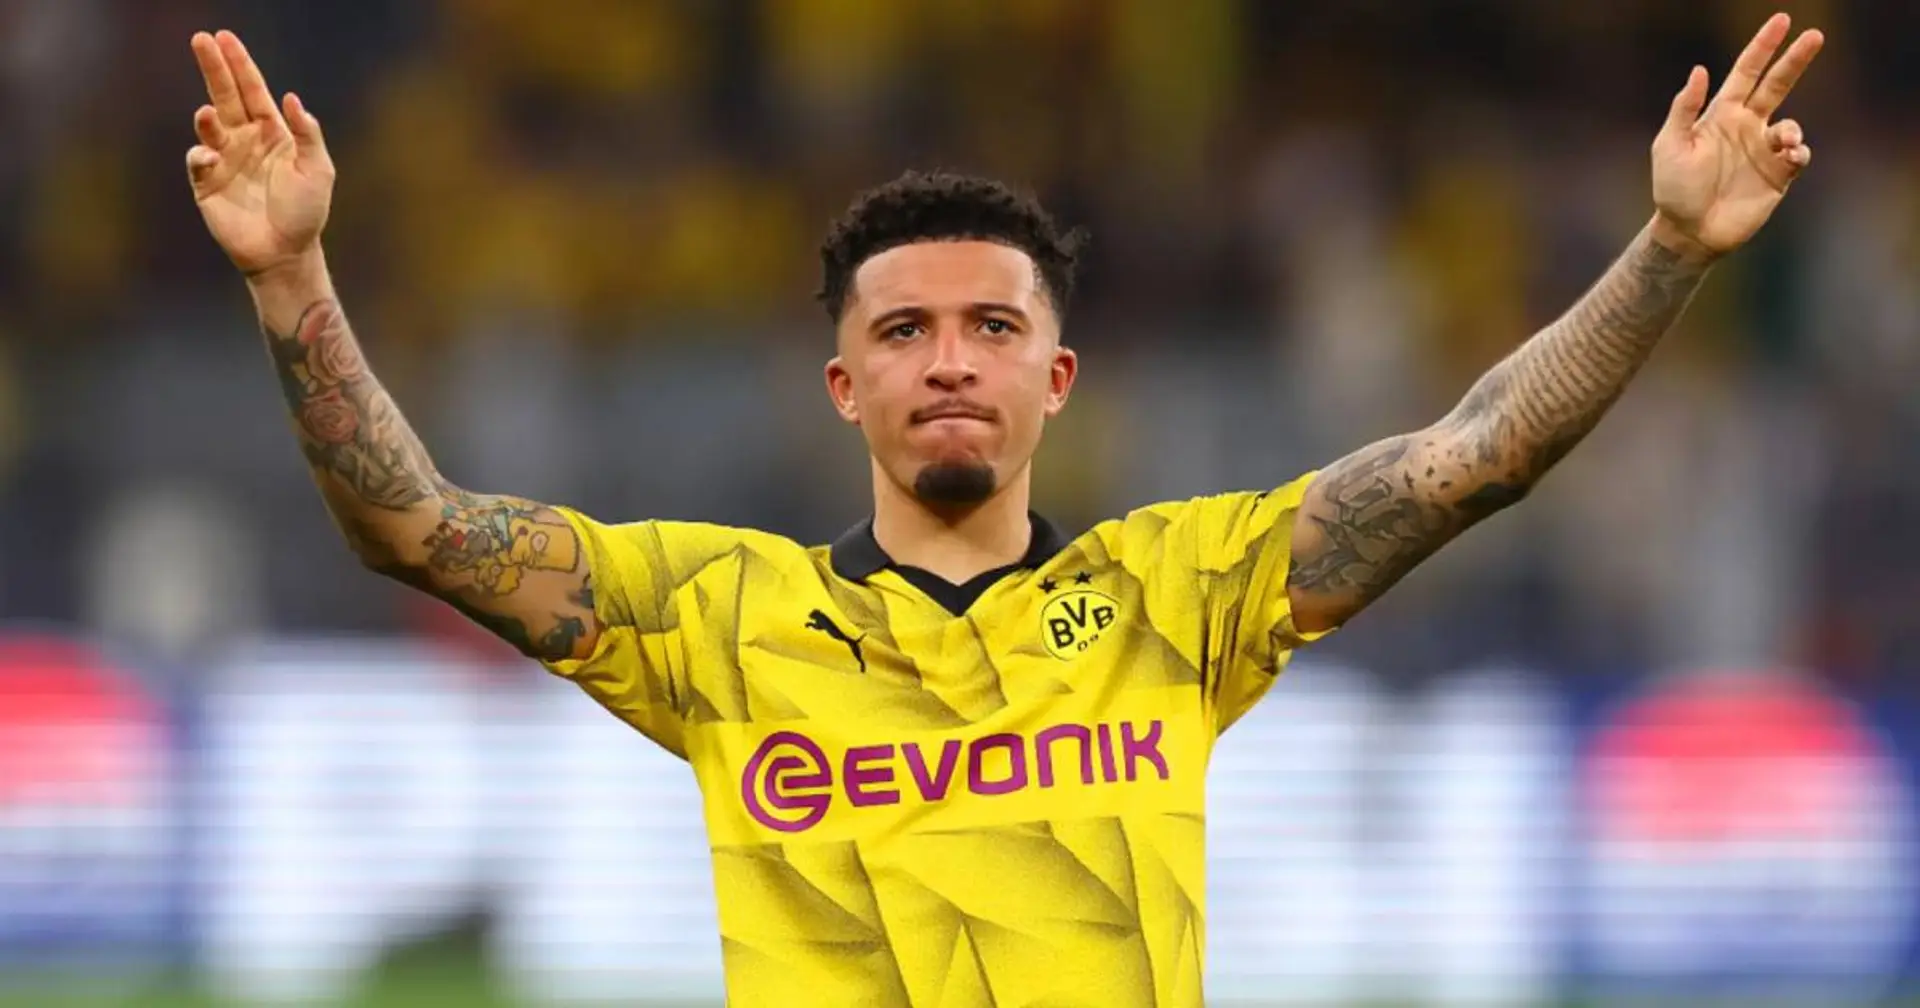 What's next for Jadon Sancho? Man United contract situation explained in 30 seconds